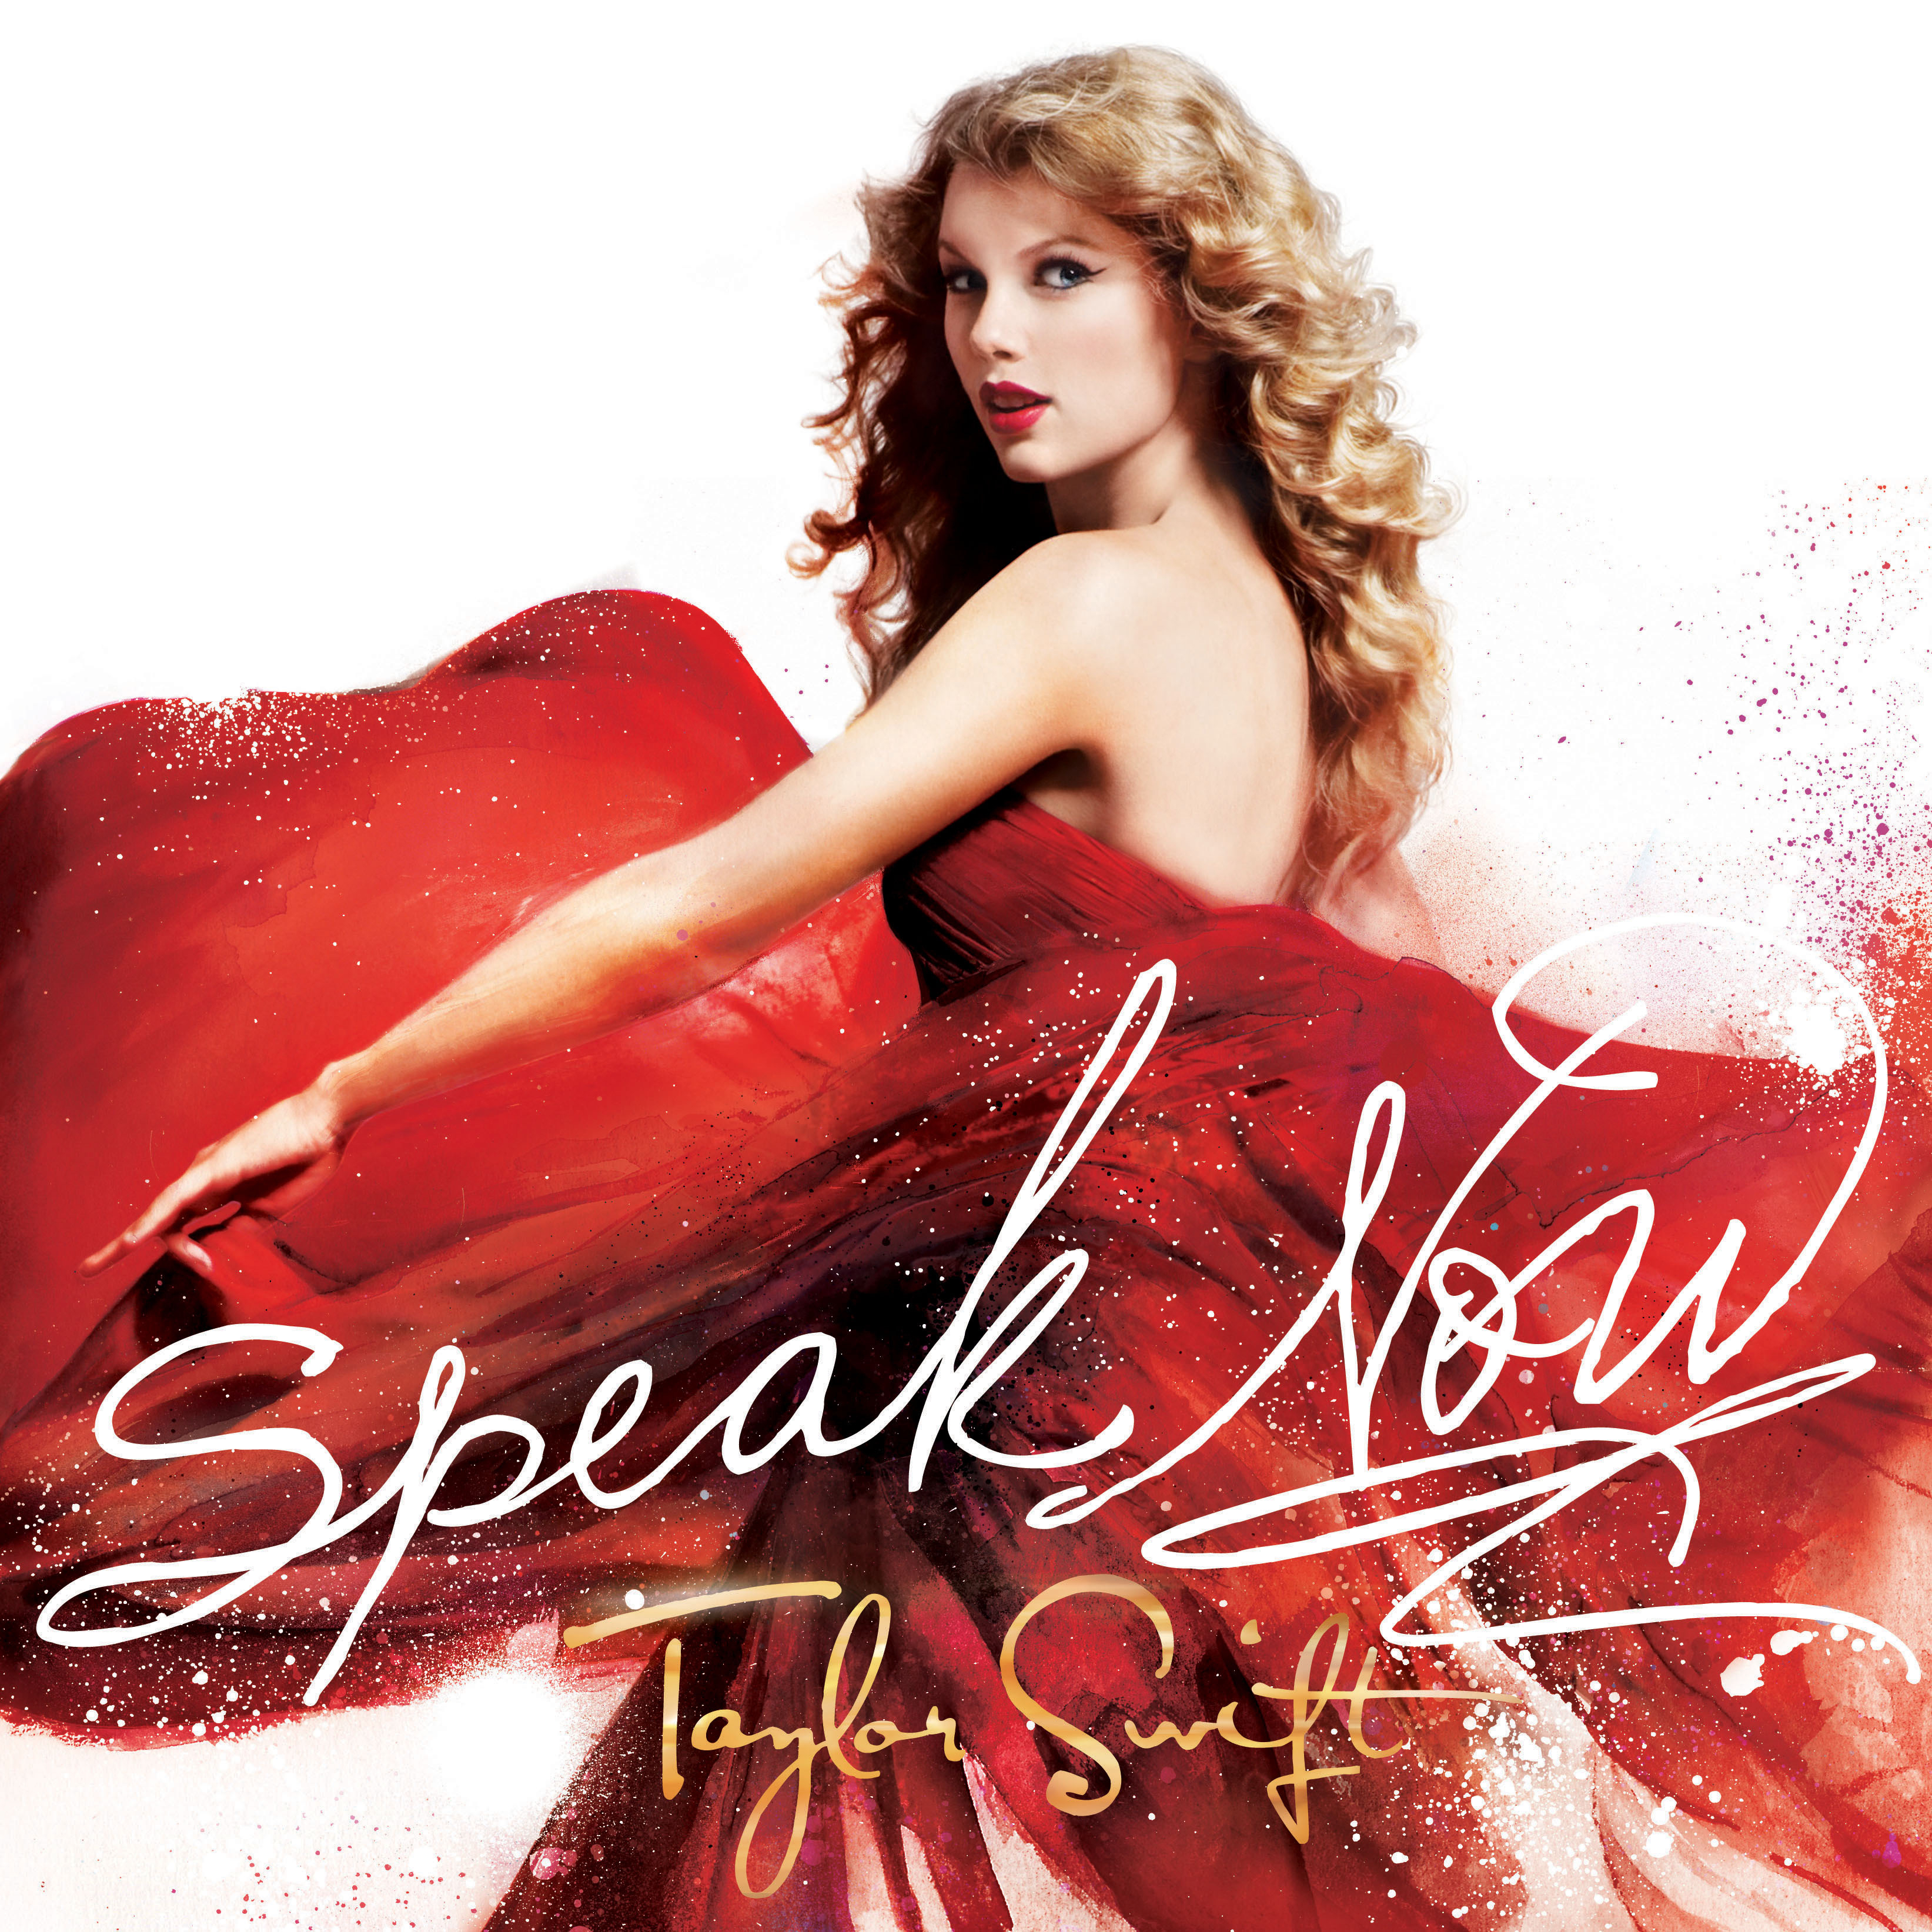 Who Are Taylor Swift's Speak Now Songs About? What She Has Said